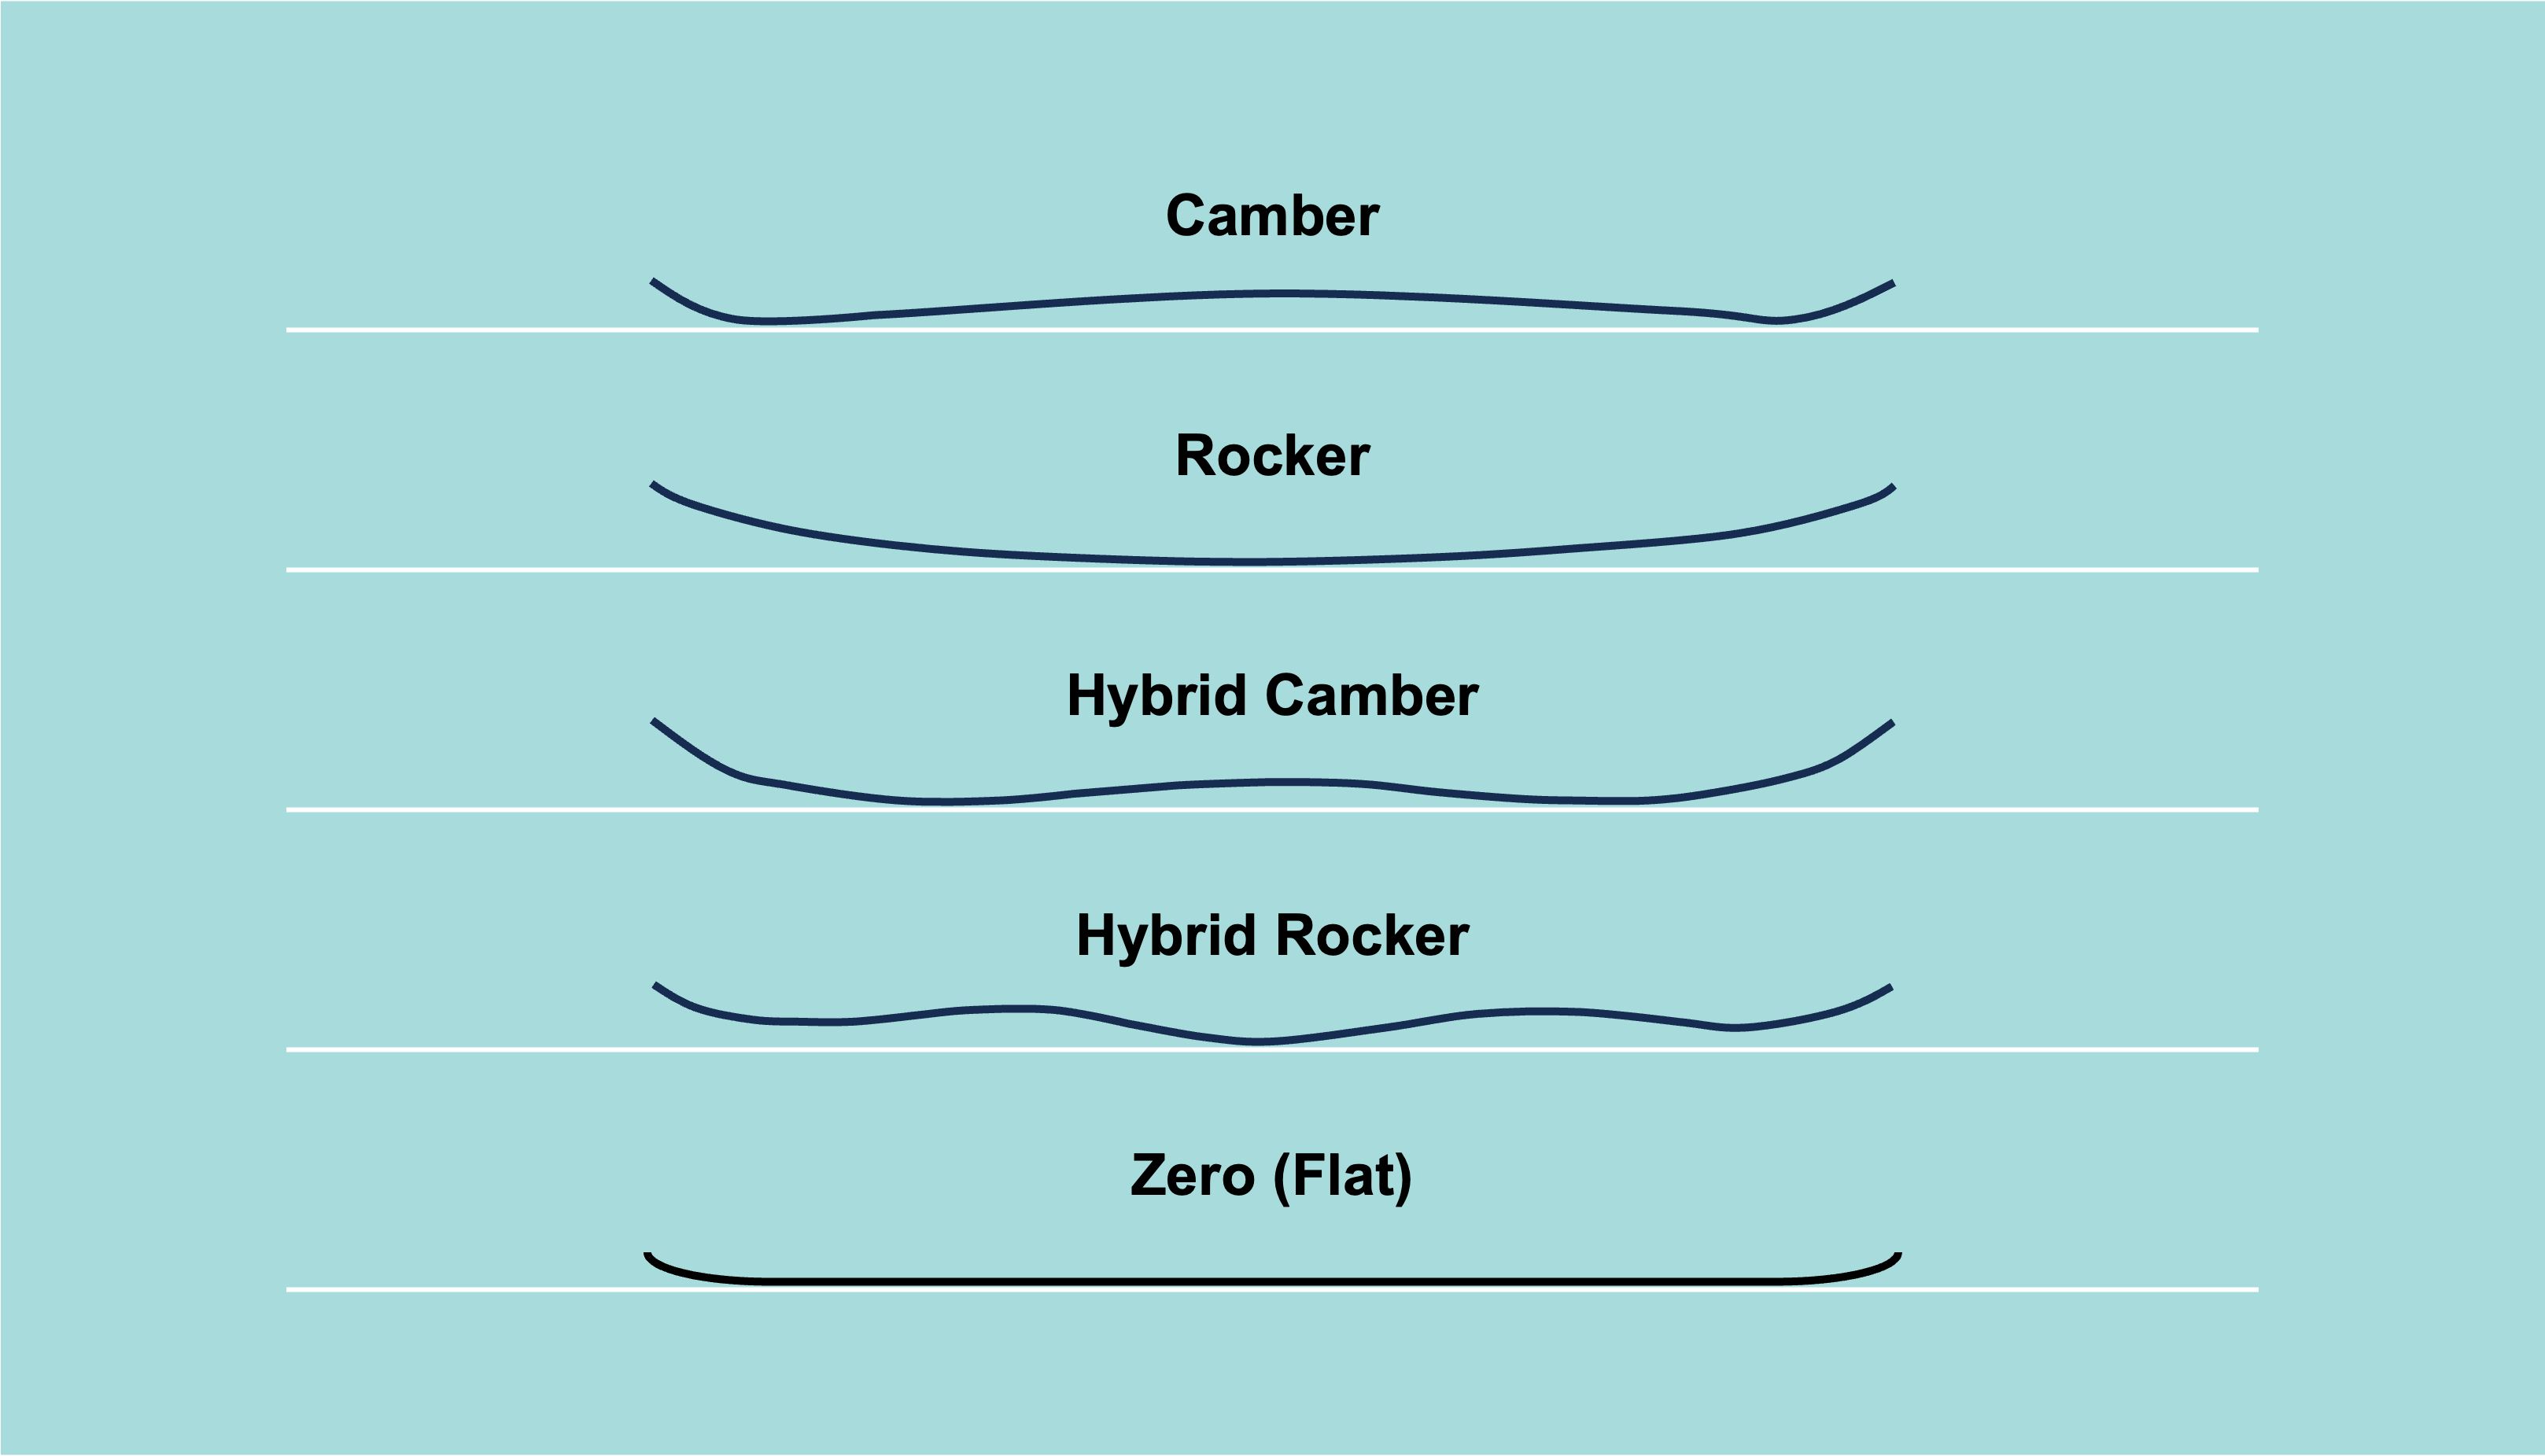 Simplified outline of the 5 main snowboard profiles